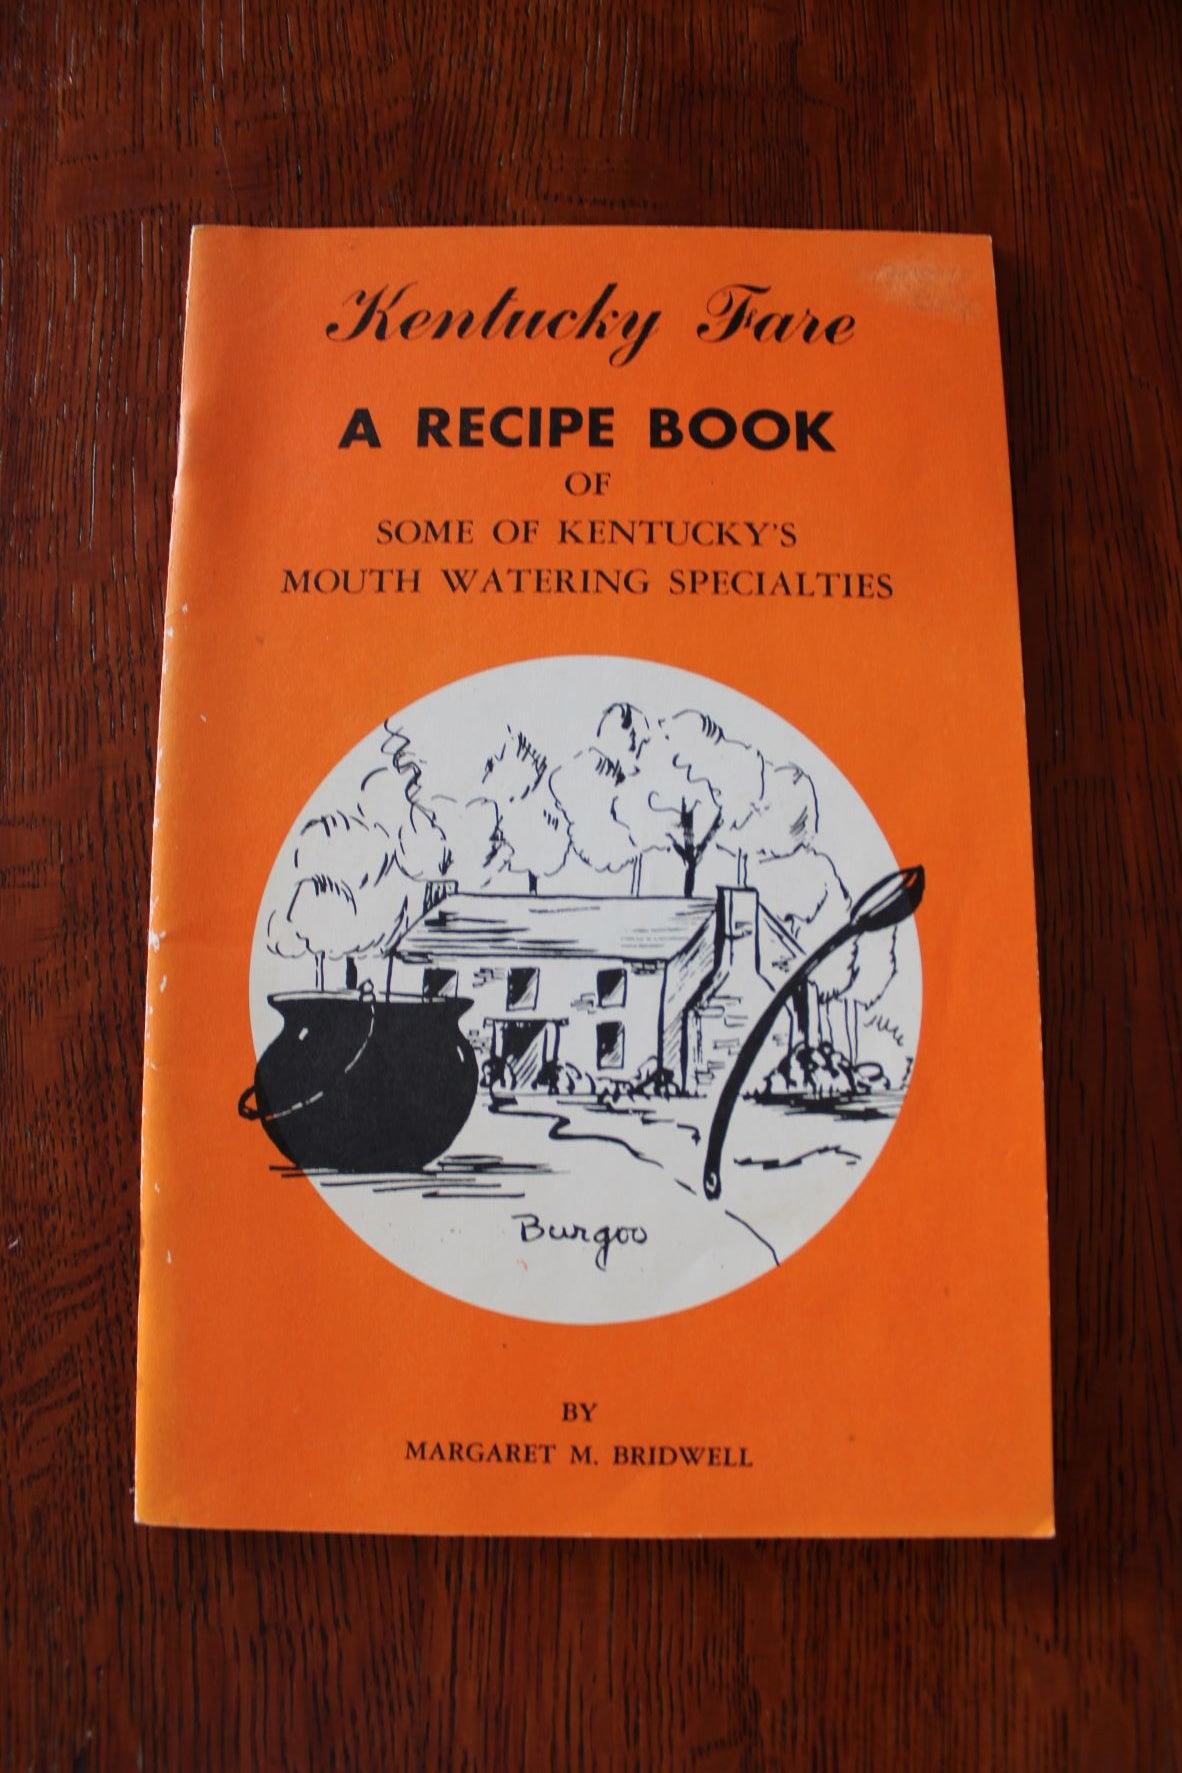 Kentucky Fare. A Recipe Book Of Some Of Kentucky's Mouth Watering Specialities